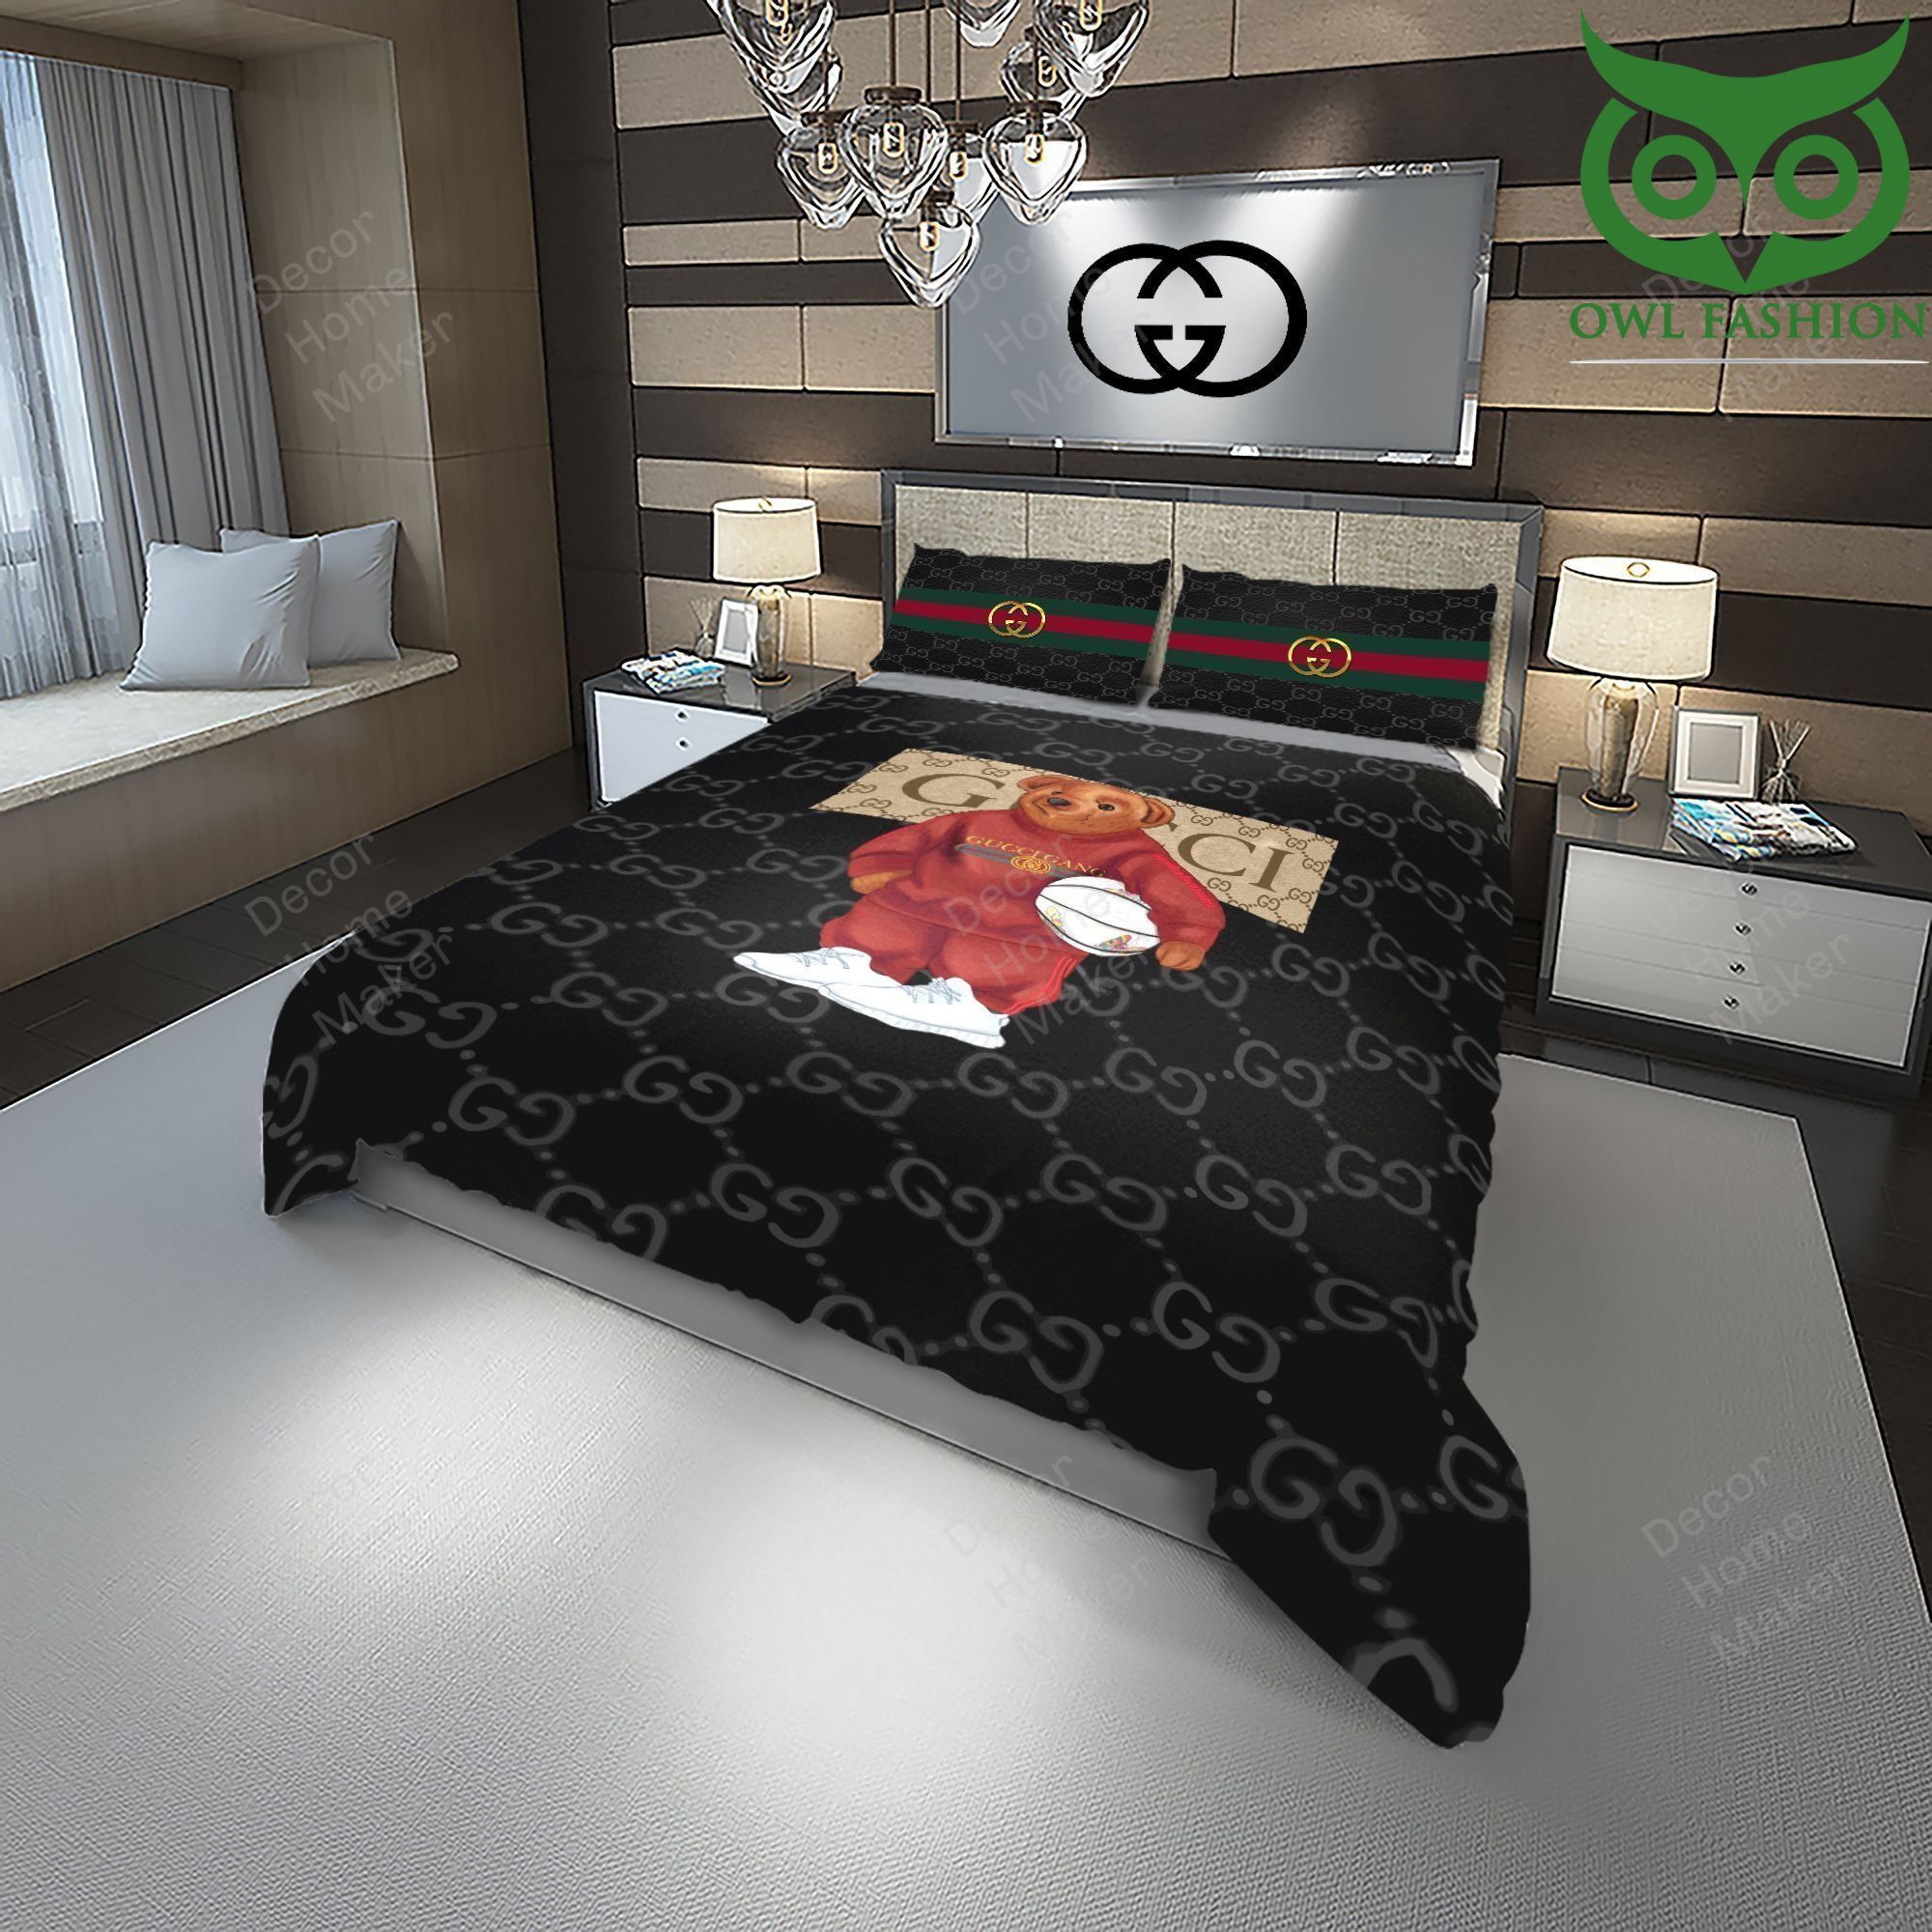 2 Gucci Bear wears red suit black bedding set